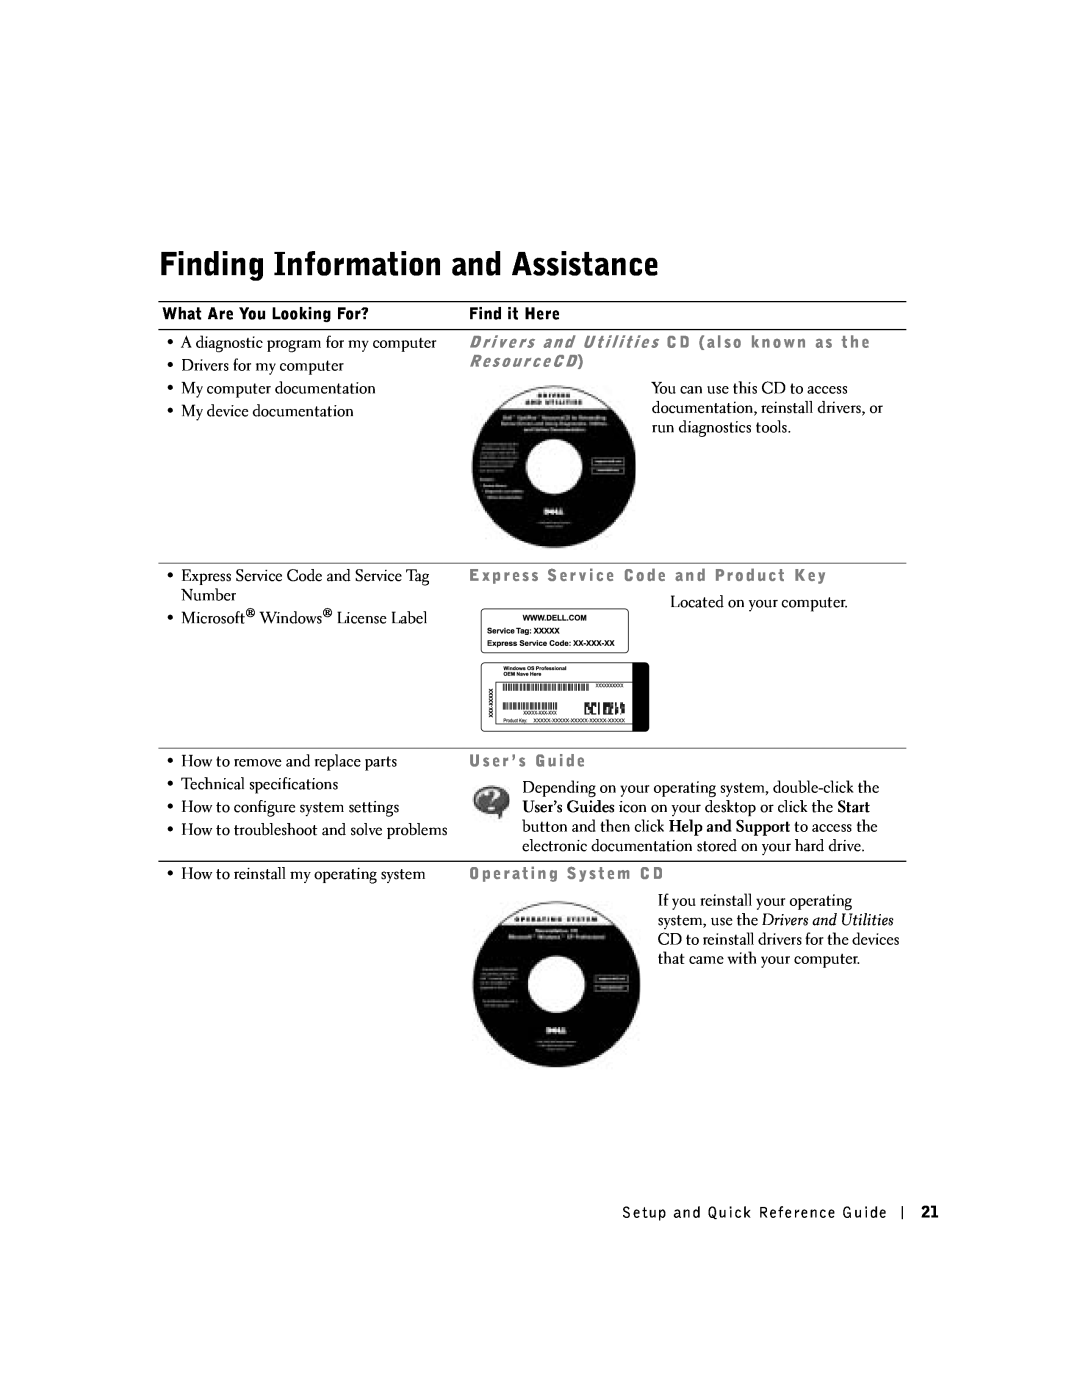 Dell SX manual Finding Information and Assistance, R e s o u r c e C D, U s e r ’ s G u i d e 